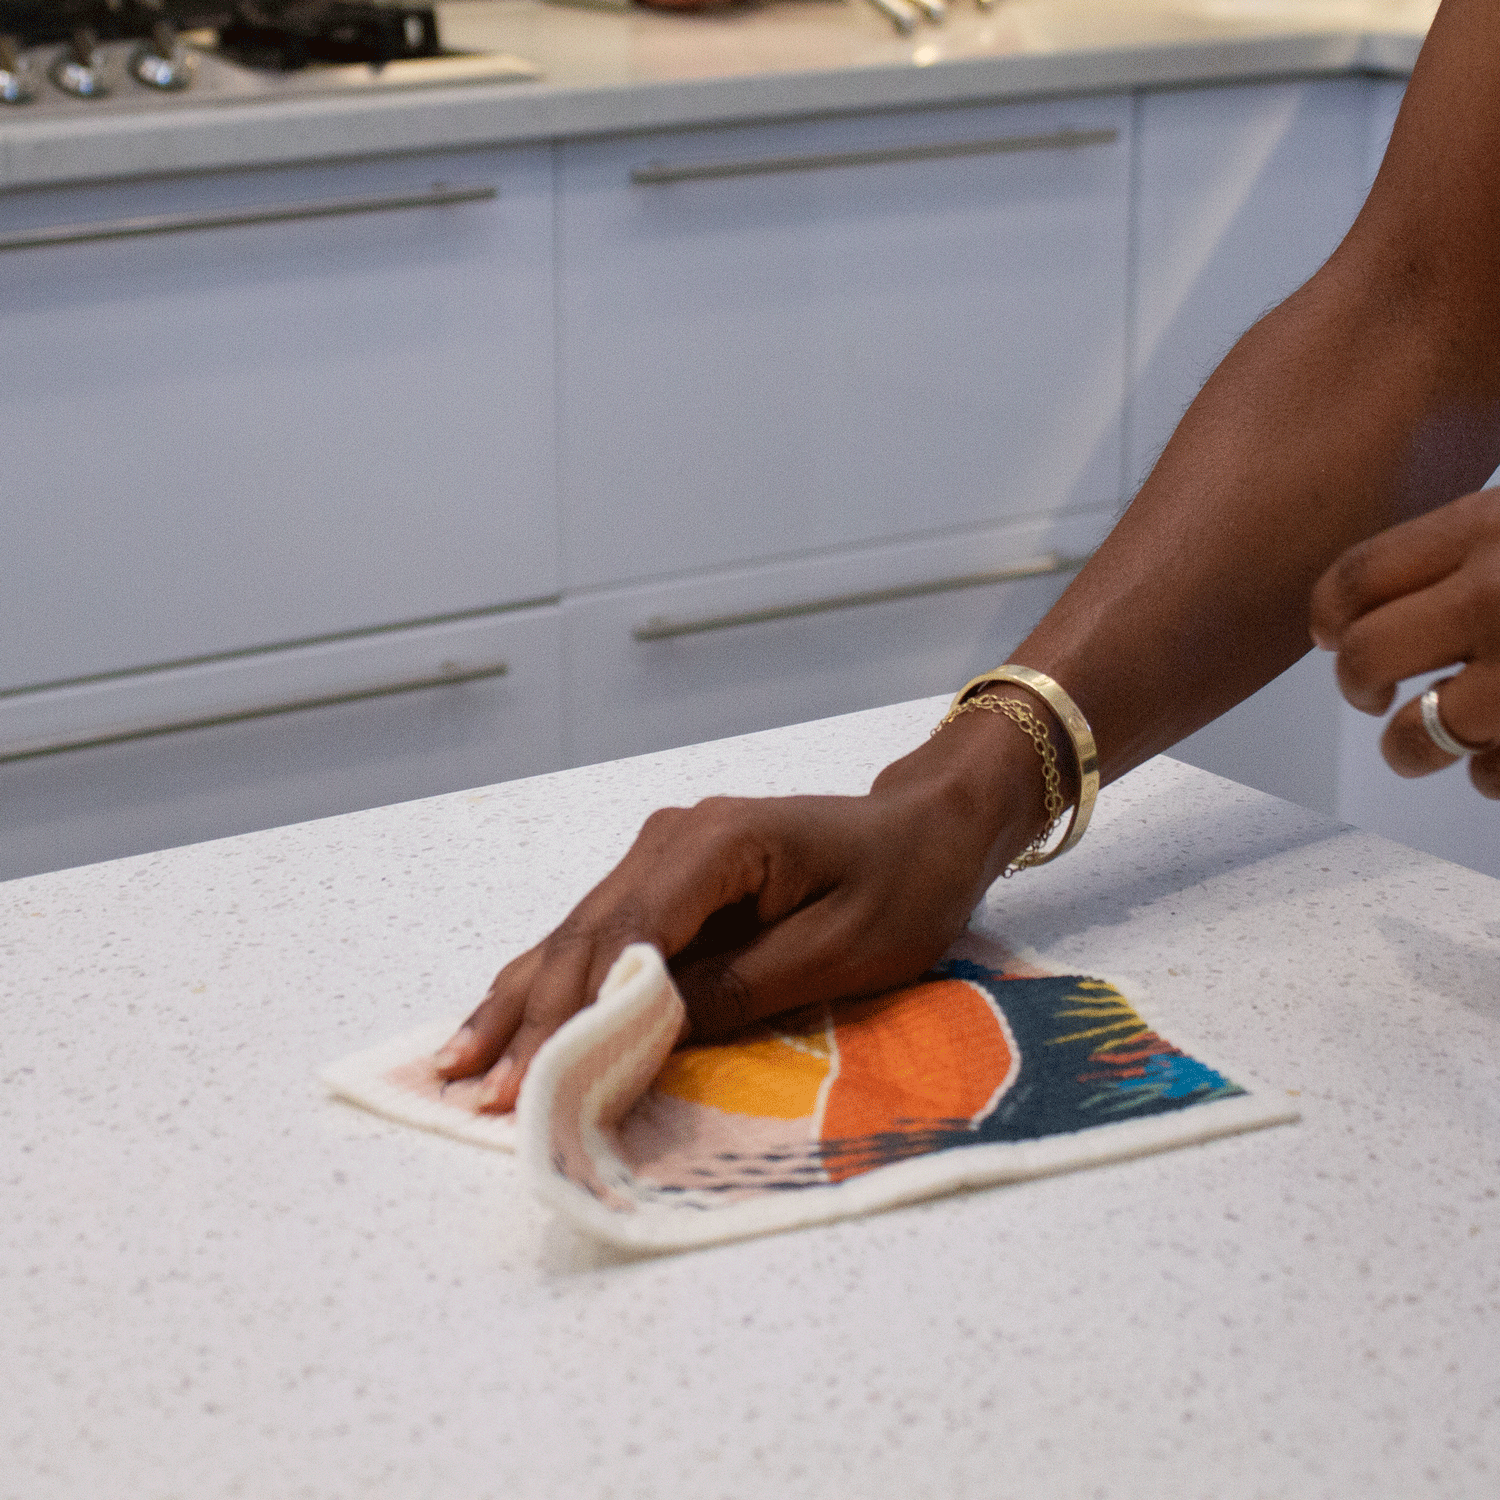 A Hand wipes a kitchen counter with the Desert Oasis sponge cloth. You can see the sponge cloth is flexible as it folds in soft curves. The bright desert scene is partially visible under the hand. 